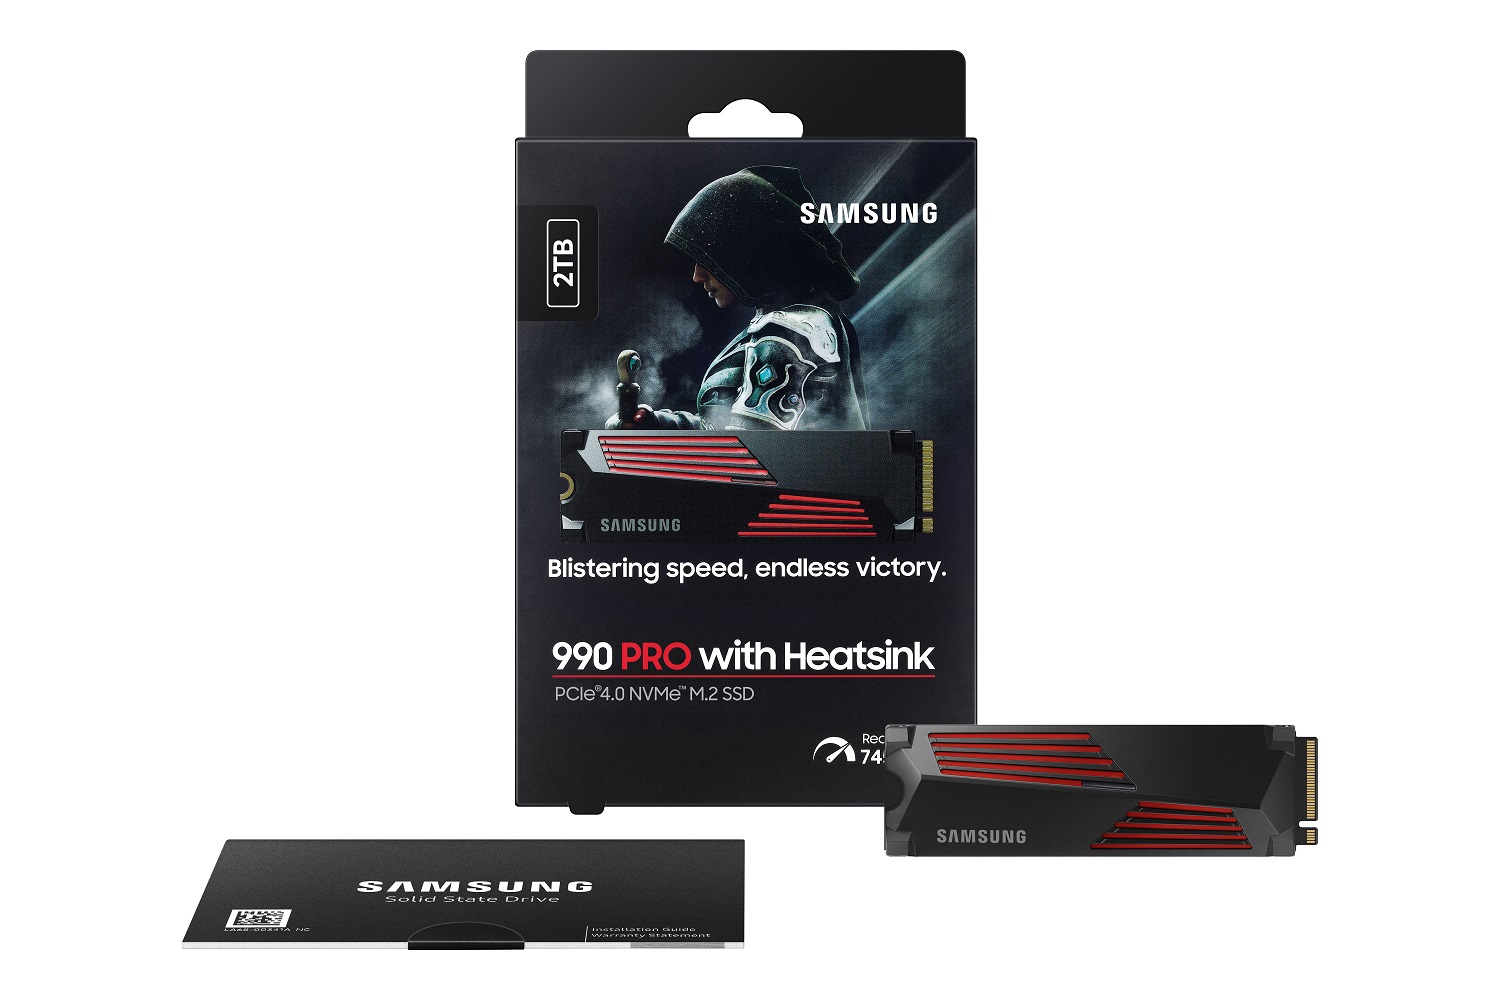 The Samsung 990 Pro SSD with a box.